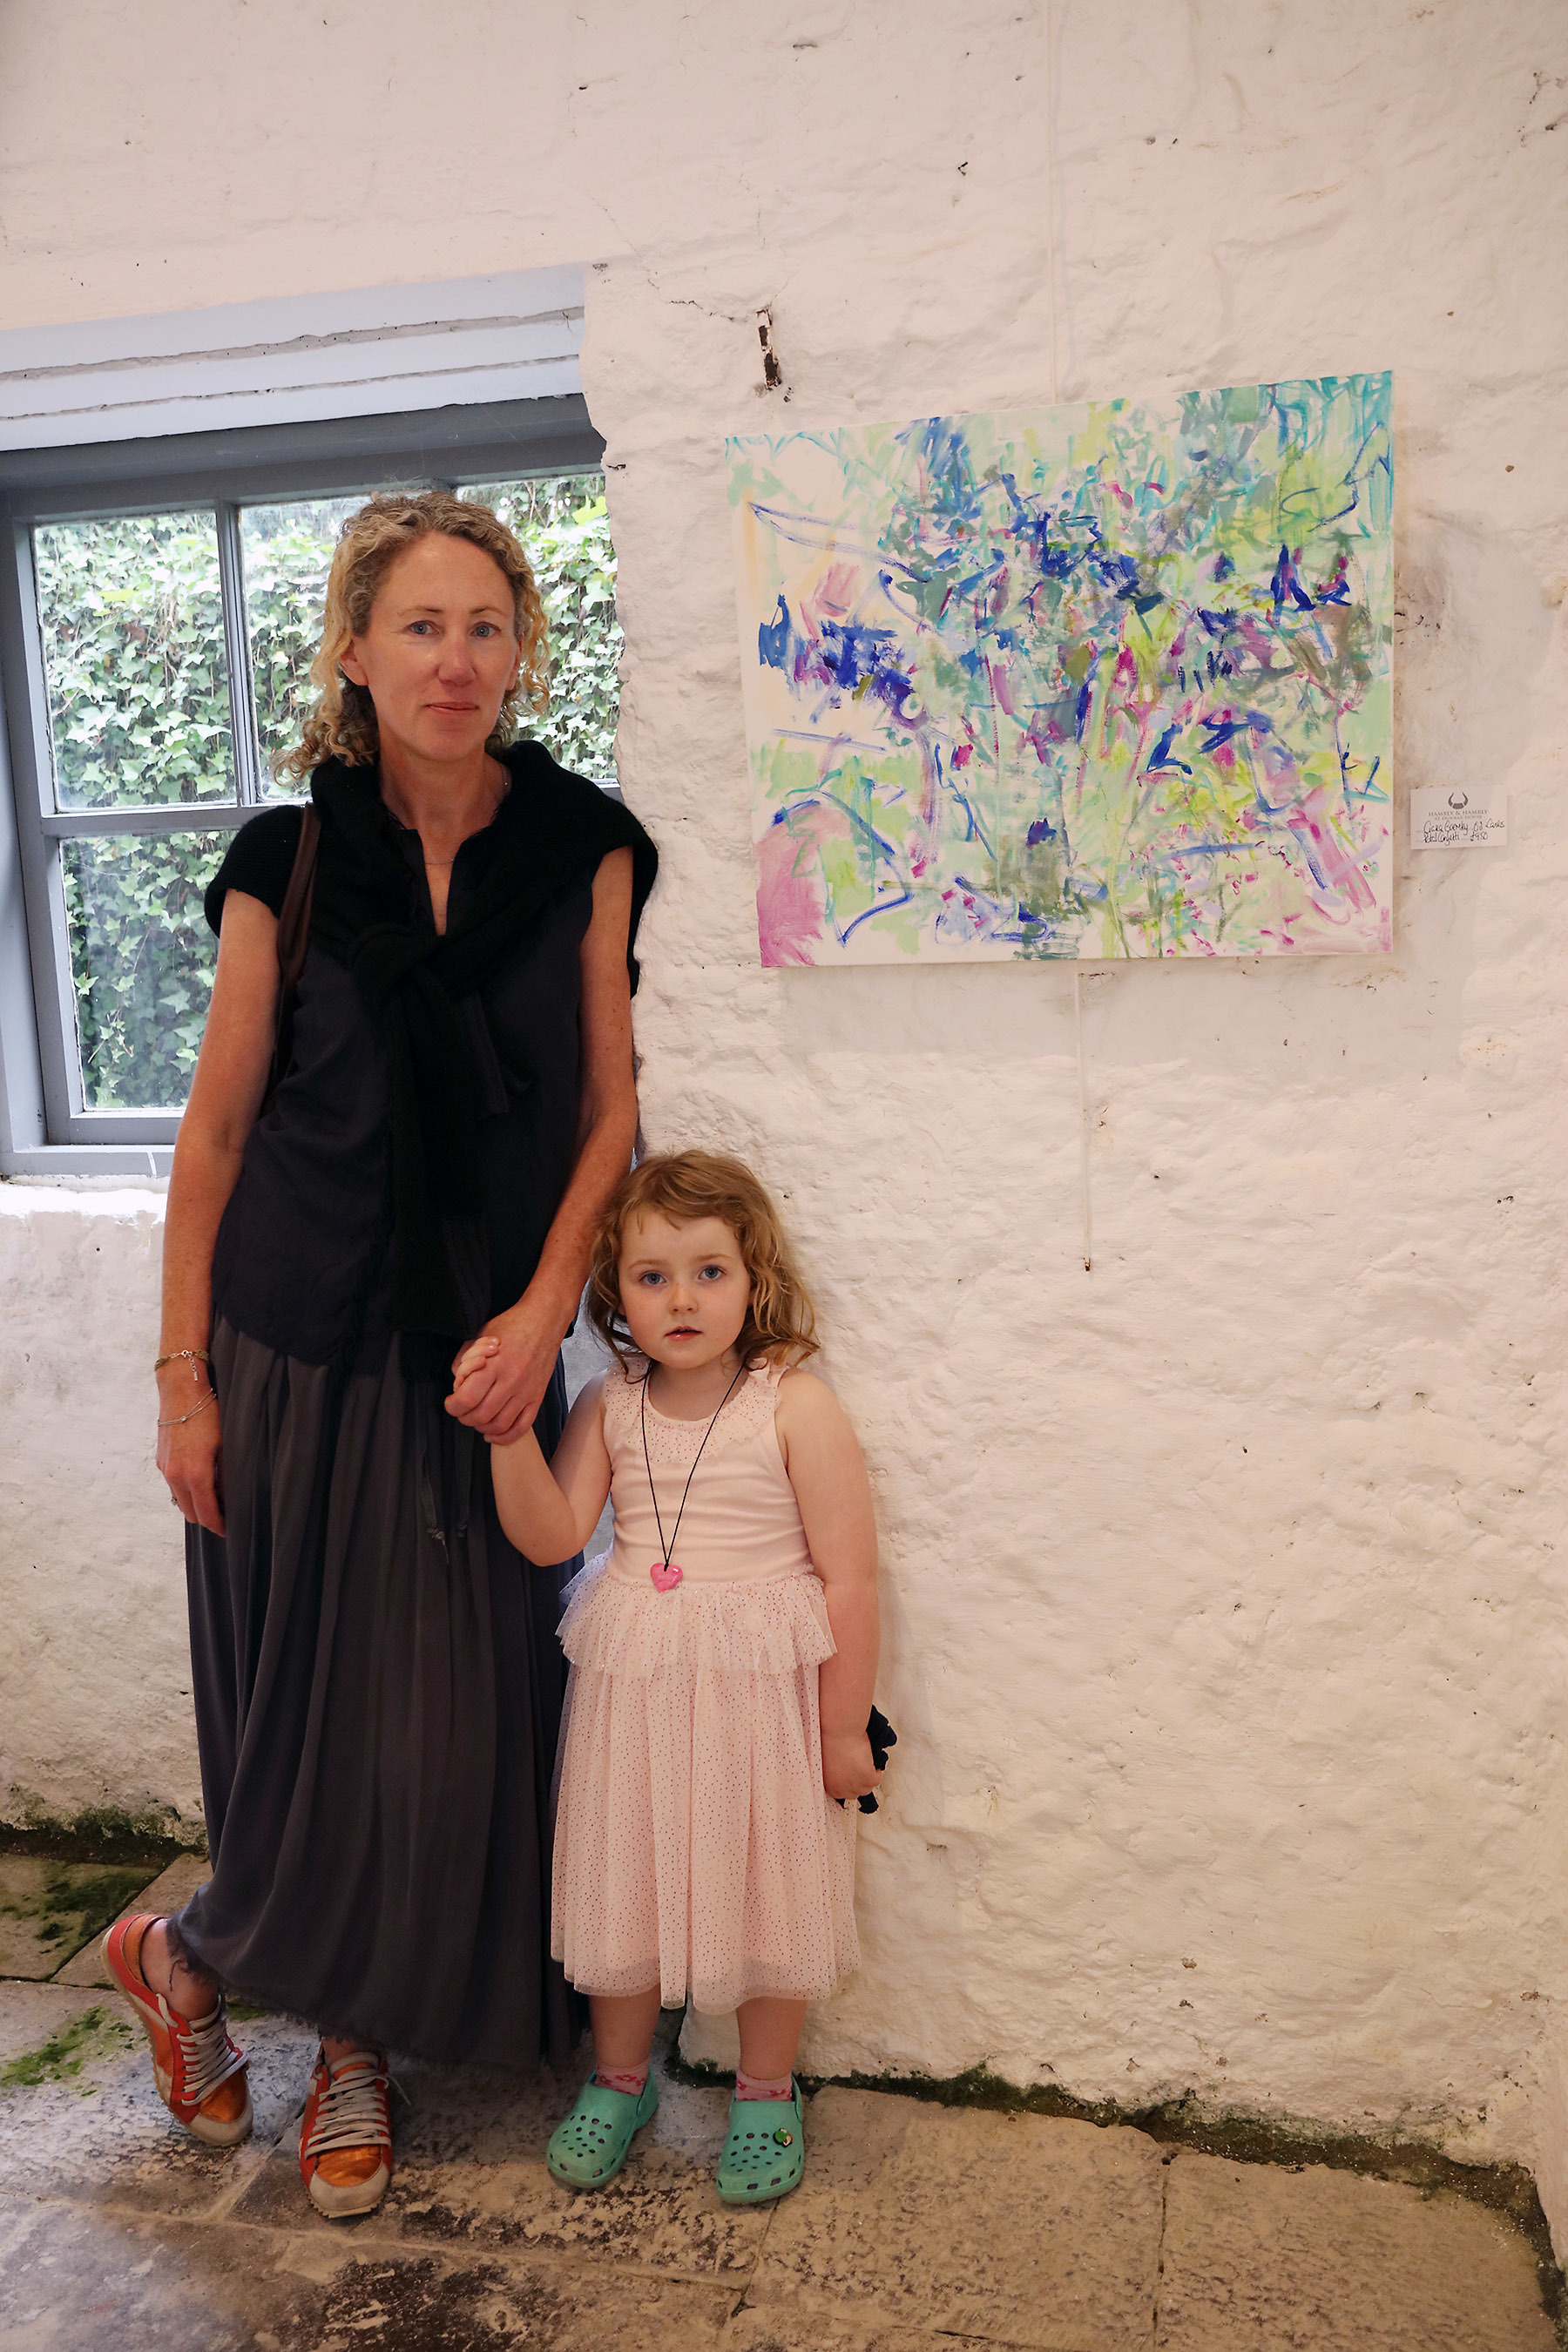 Artist Ciara Gormley and a young art lover guest at the launch of her exhibition.